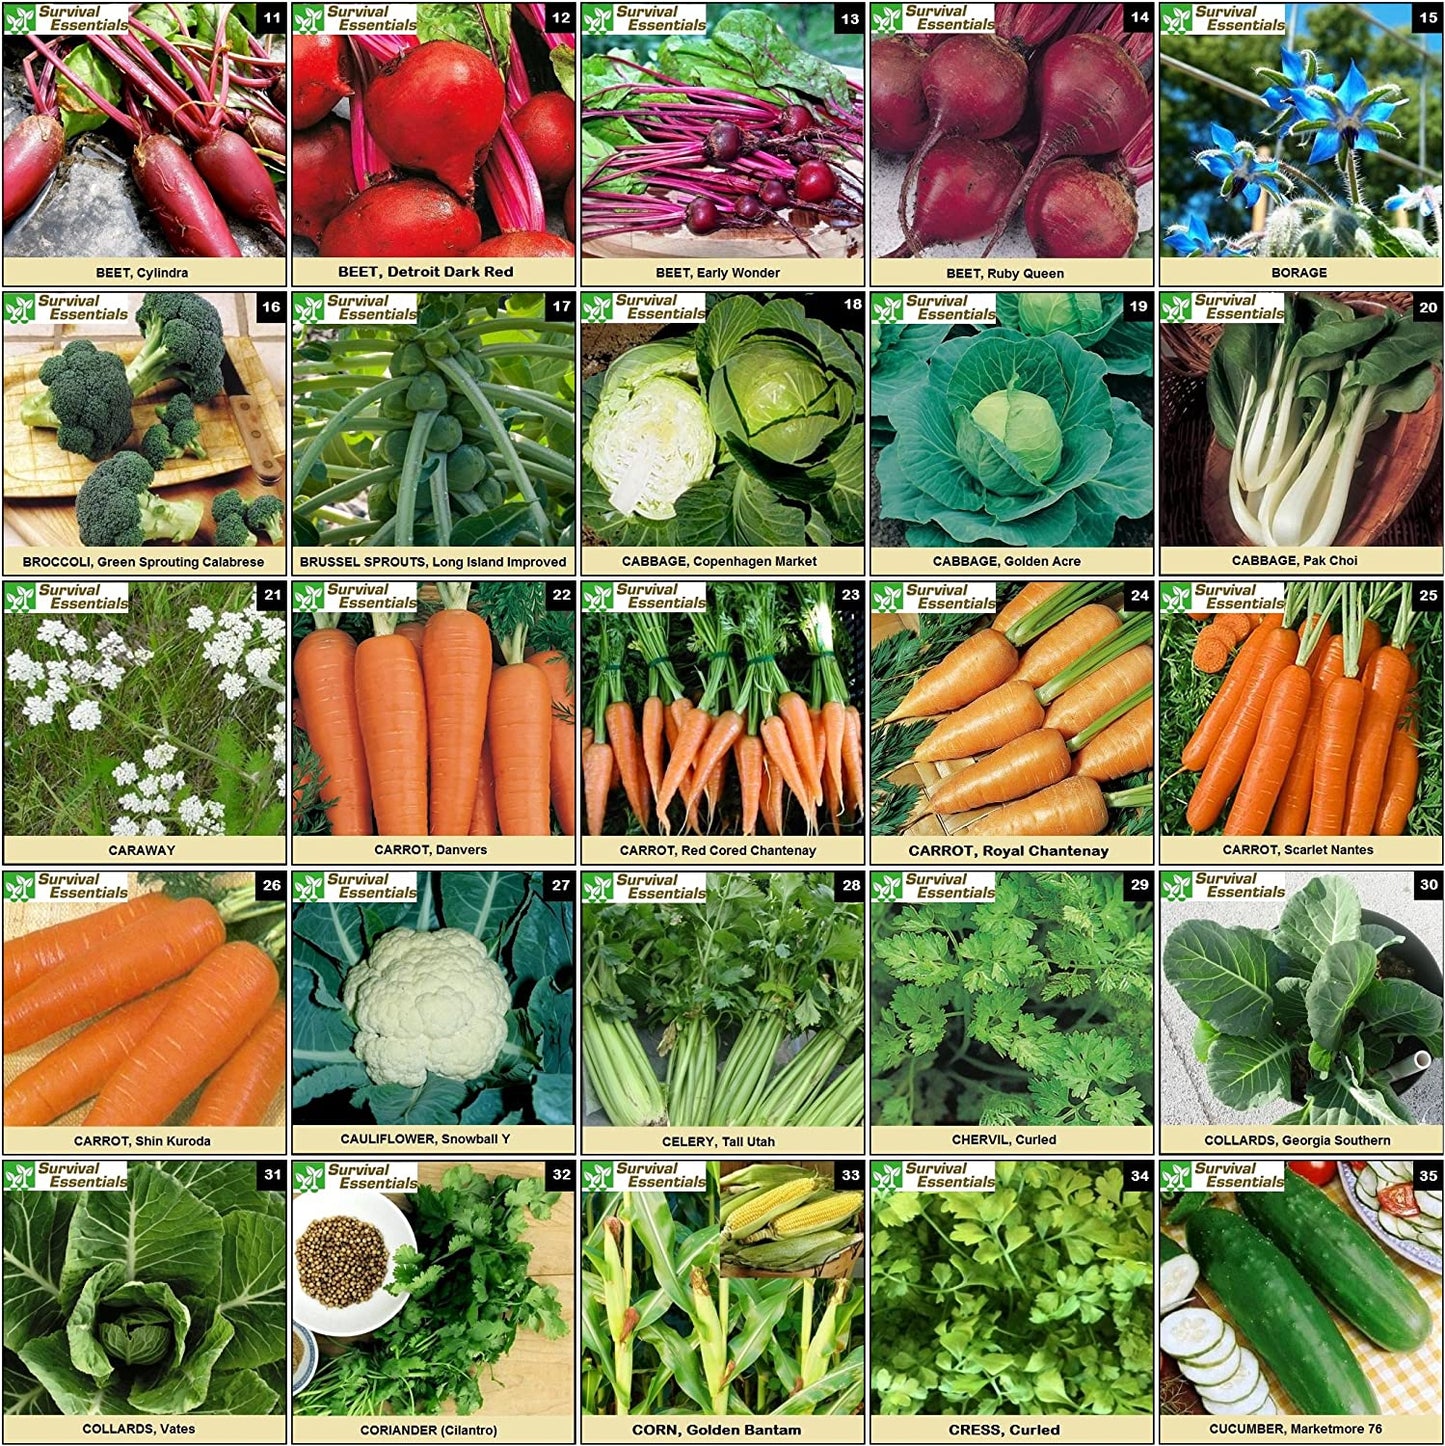 Image displaying a variety of vegetables arranged alphabetically from B to C, showcasing a diverse selection of produce